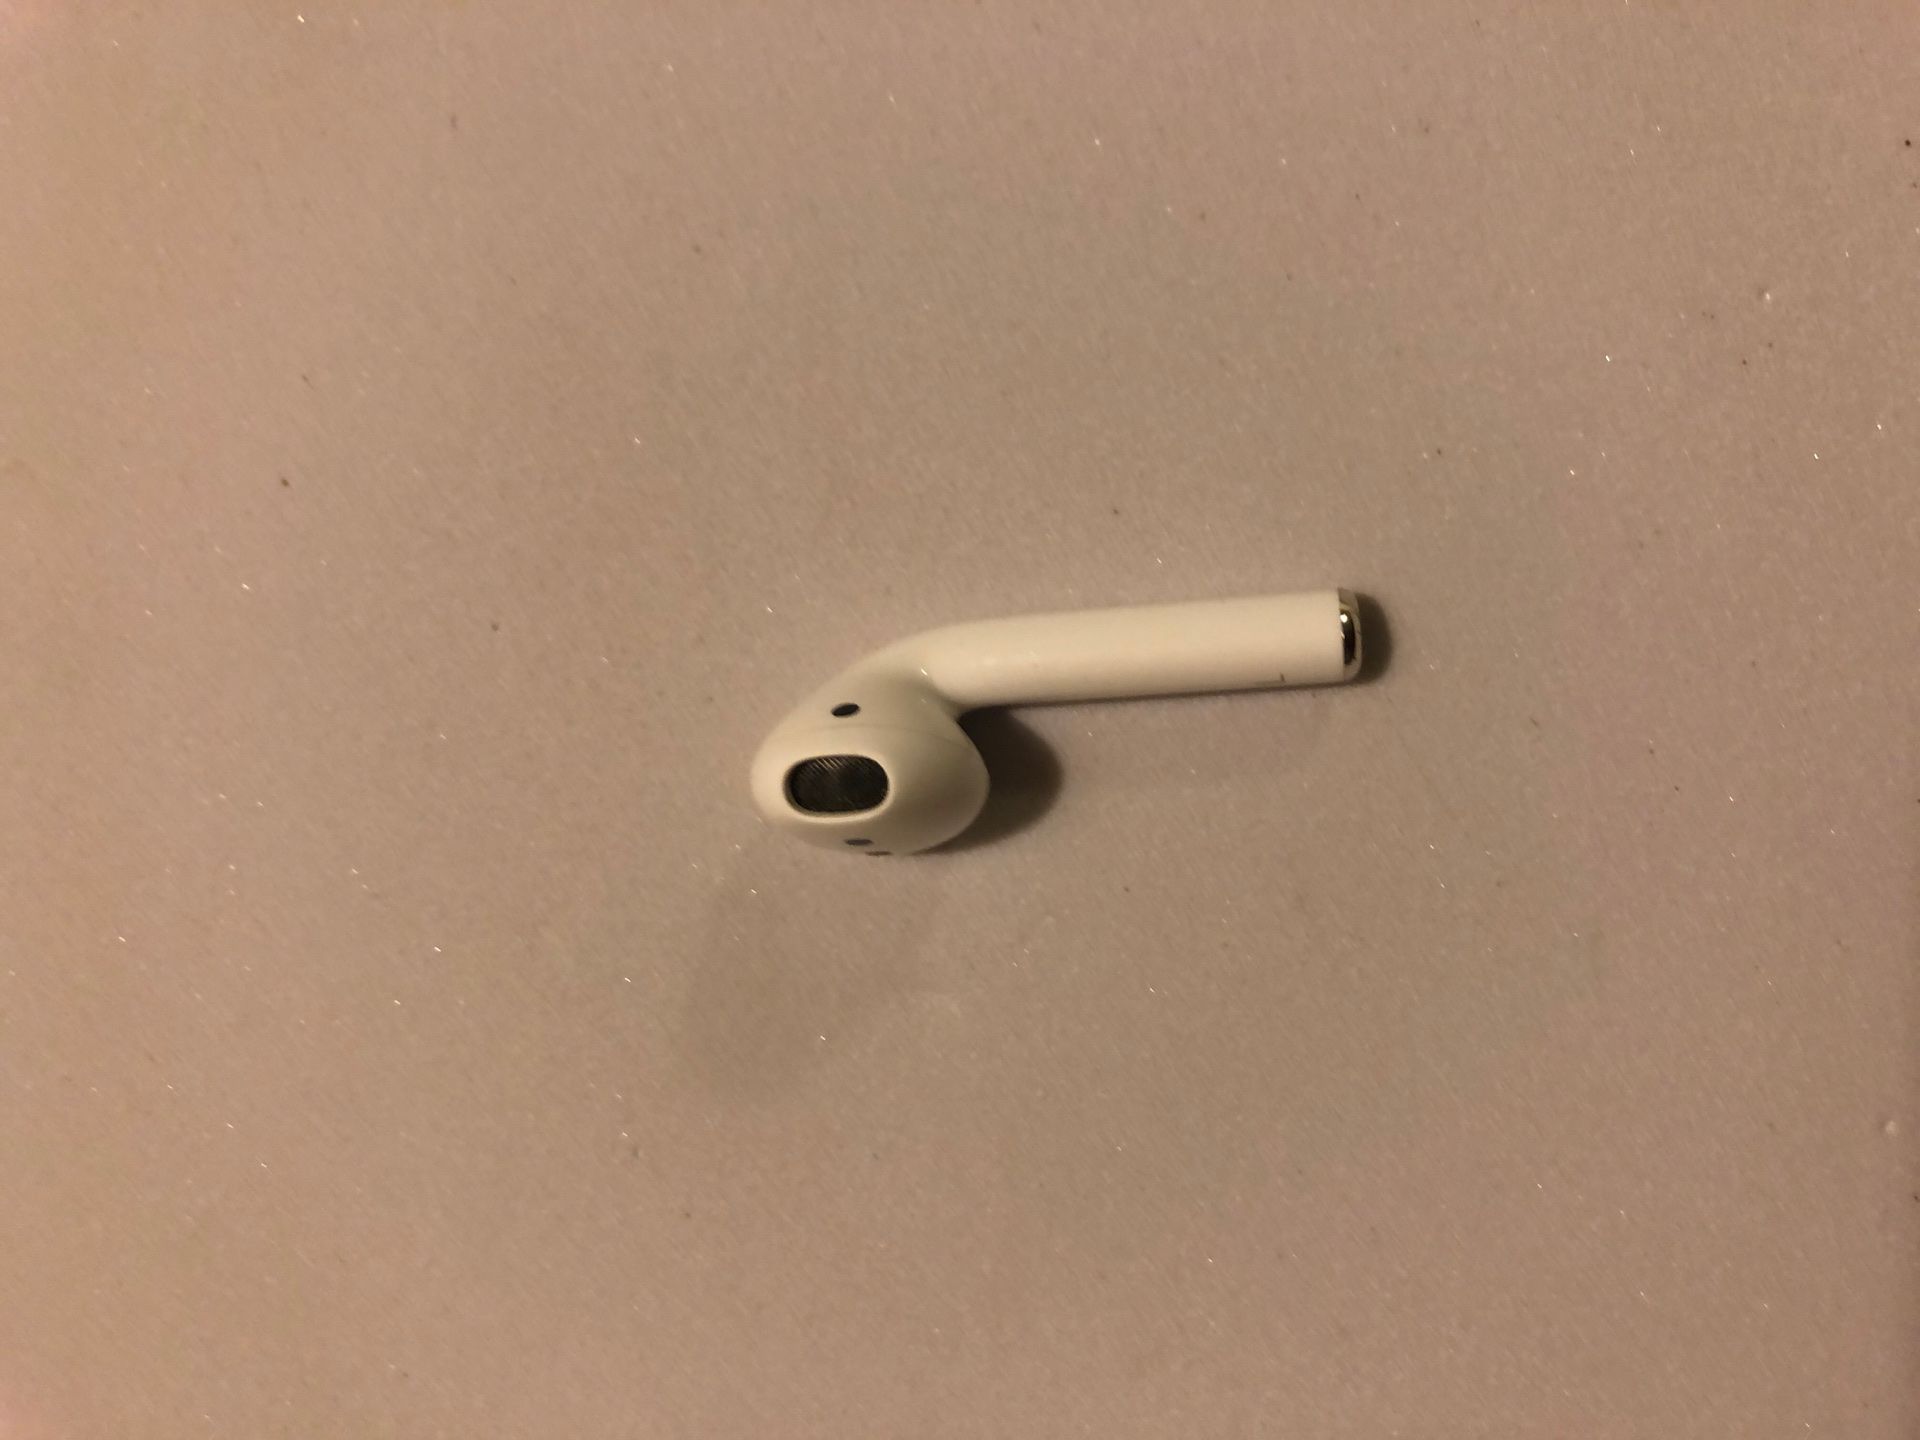 Apple Airpods 1st Generation Replacement Earbud (Left Ear Only)